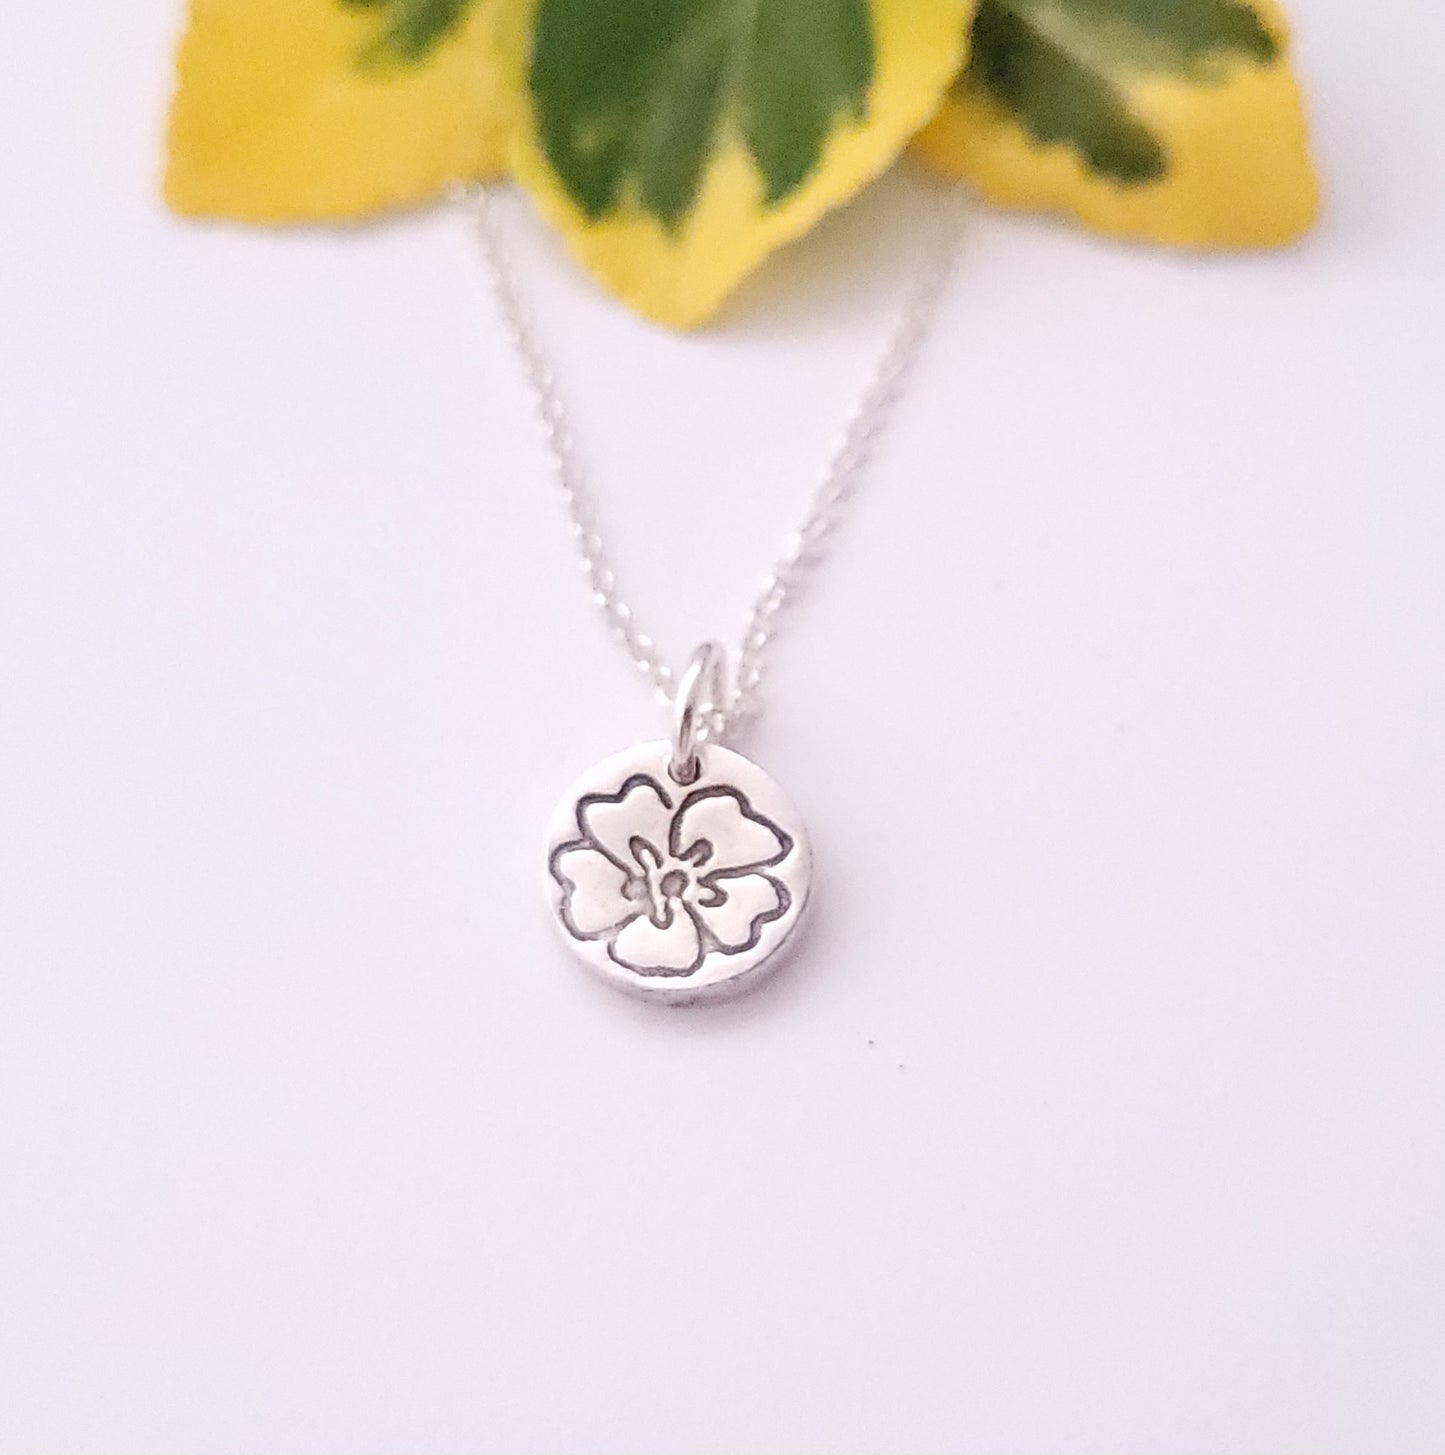 Clearance Silver Flower Drop Tiny Floral Charms (10pcs / 12mm x 14mm / Tibetan Silver / 2 Sided) Small Flower Pendant Spring Jewellery Making CHM2224